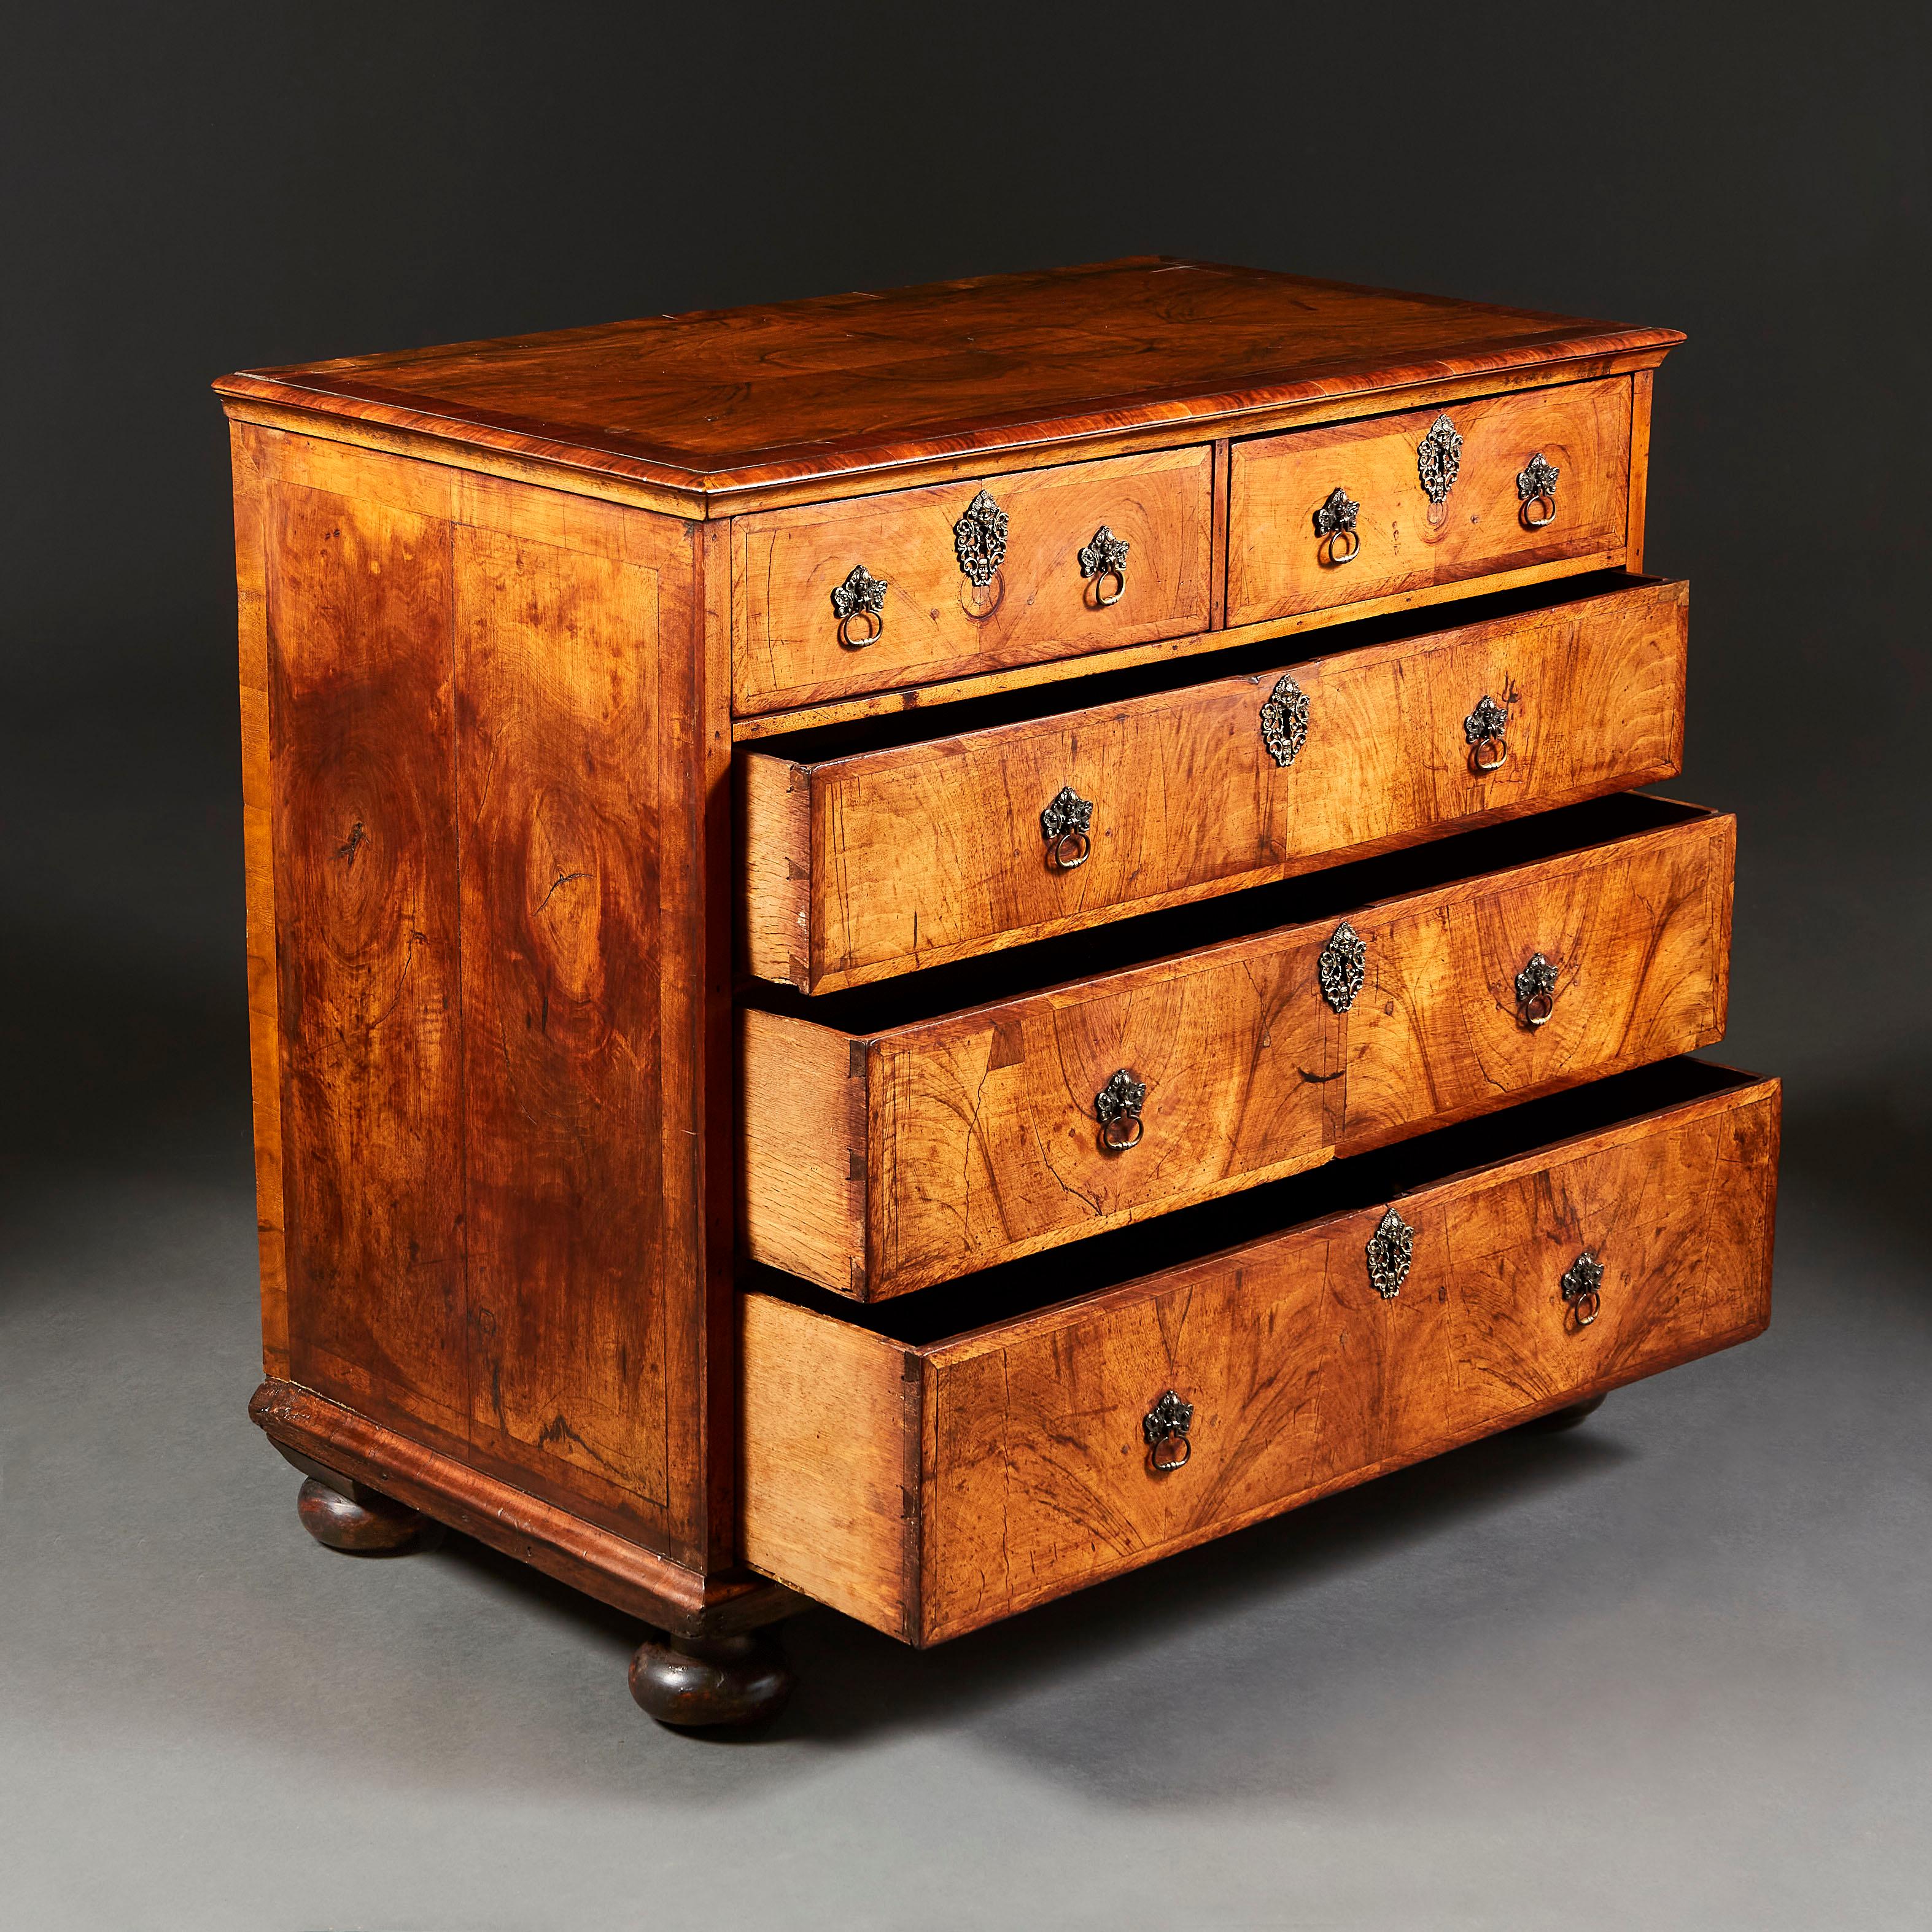 A fine late seventeenth century walnut chest of drawers with three graduated drawers to the front, with two shorter drawers to the frieze, with brass escutcheons and handles with cherub masks, all supported on bun feet. Dated to the underside of the